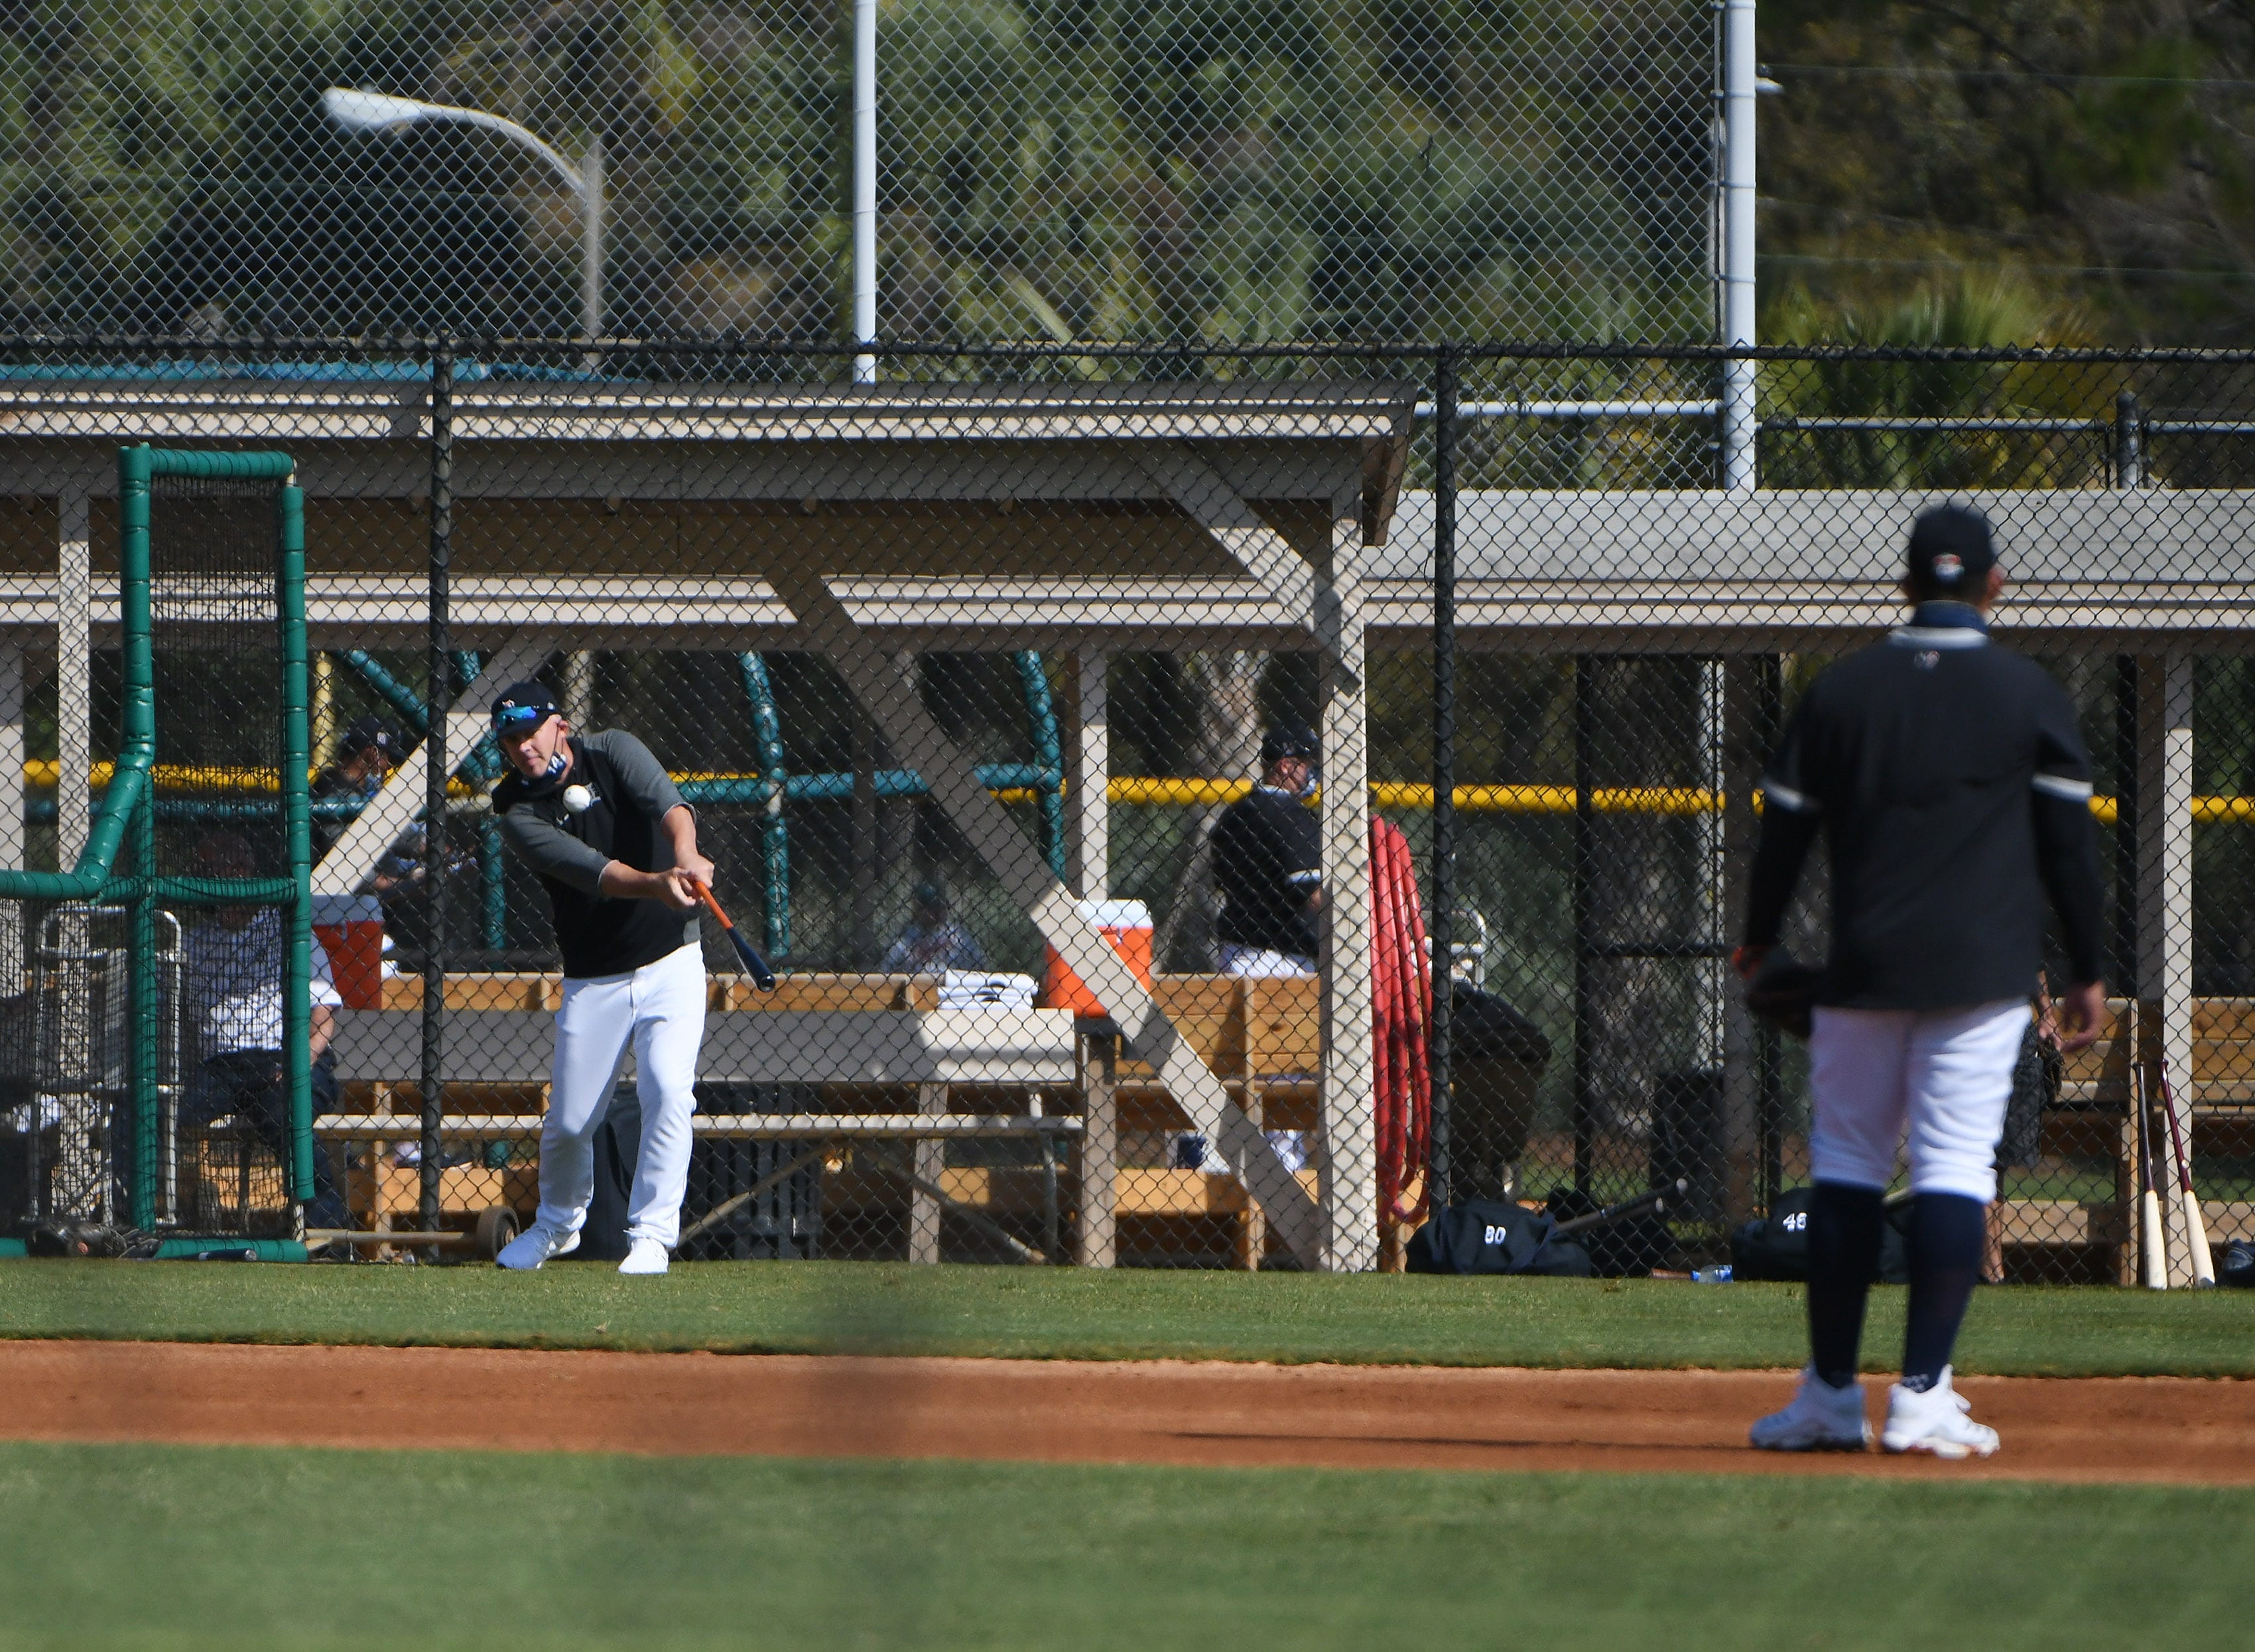 Tigers manager AJ Hinch hits ground balls during infield practice.